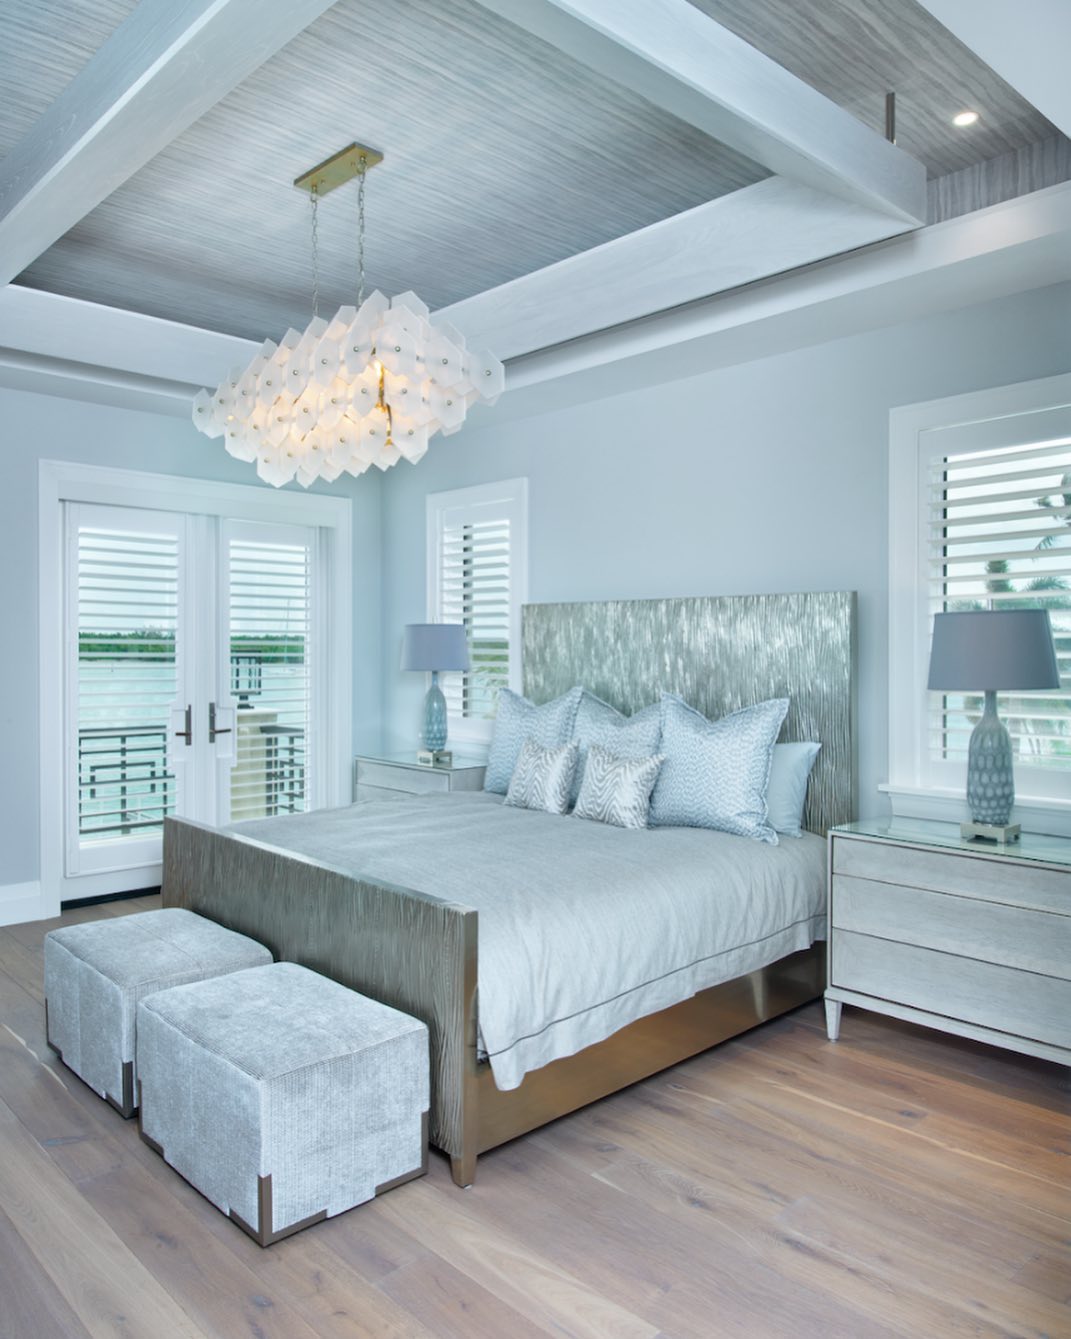 Photo of large, open bedroom with light hardwood floors and sky blue walls.